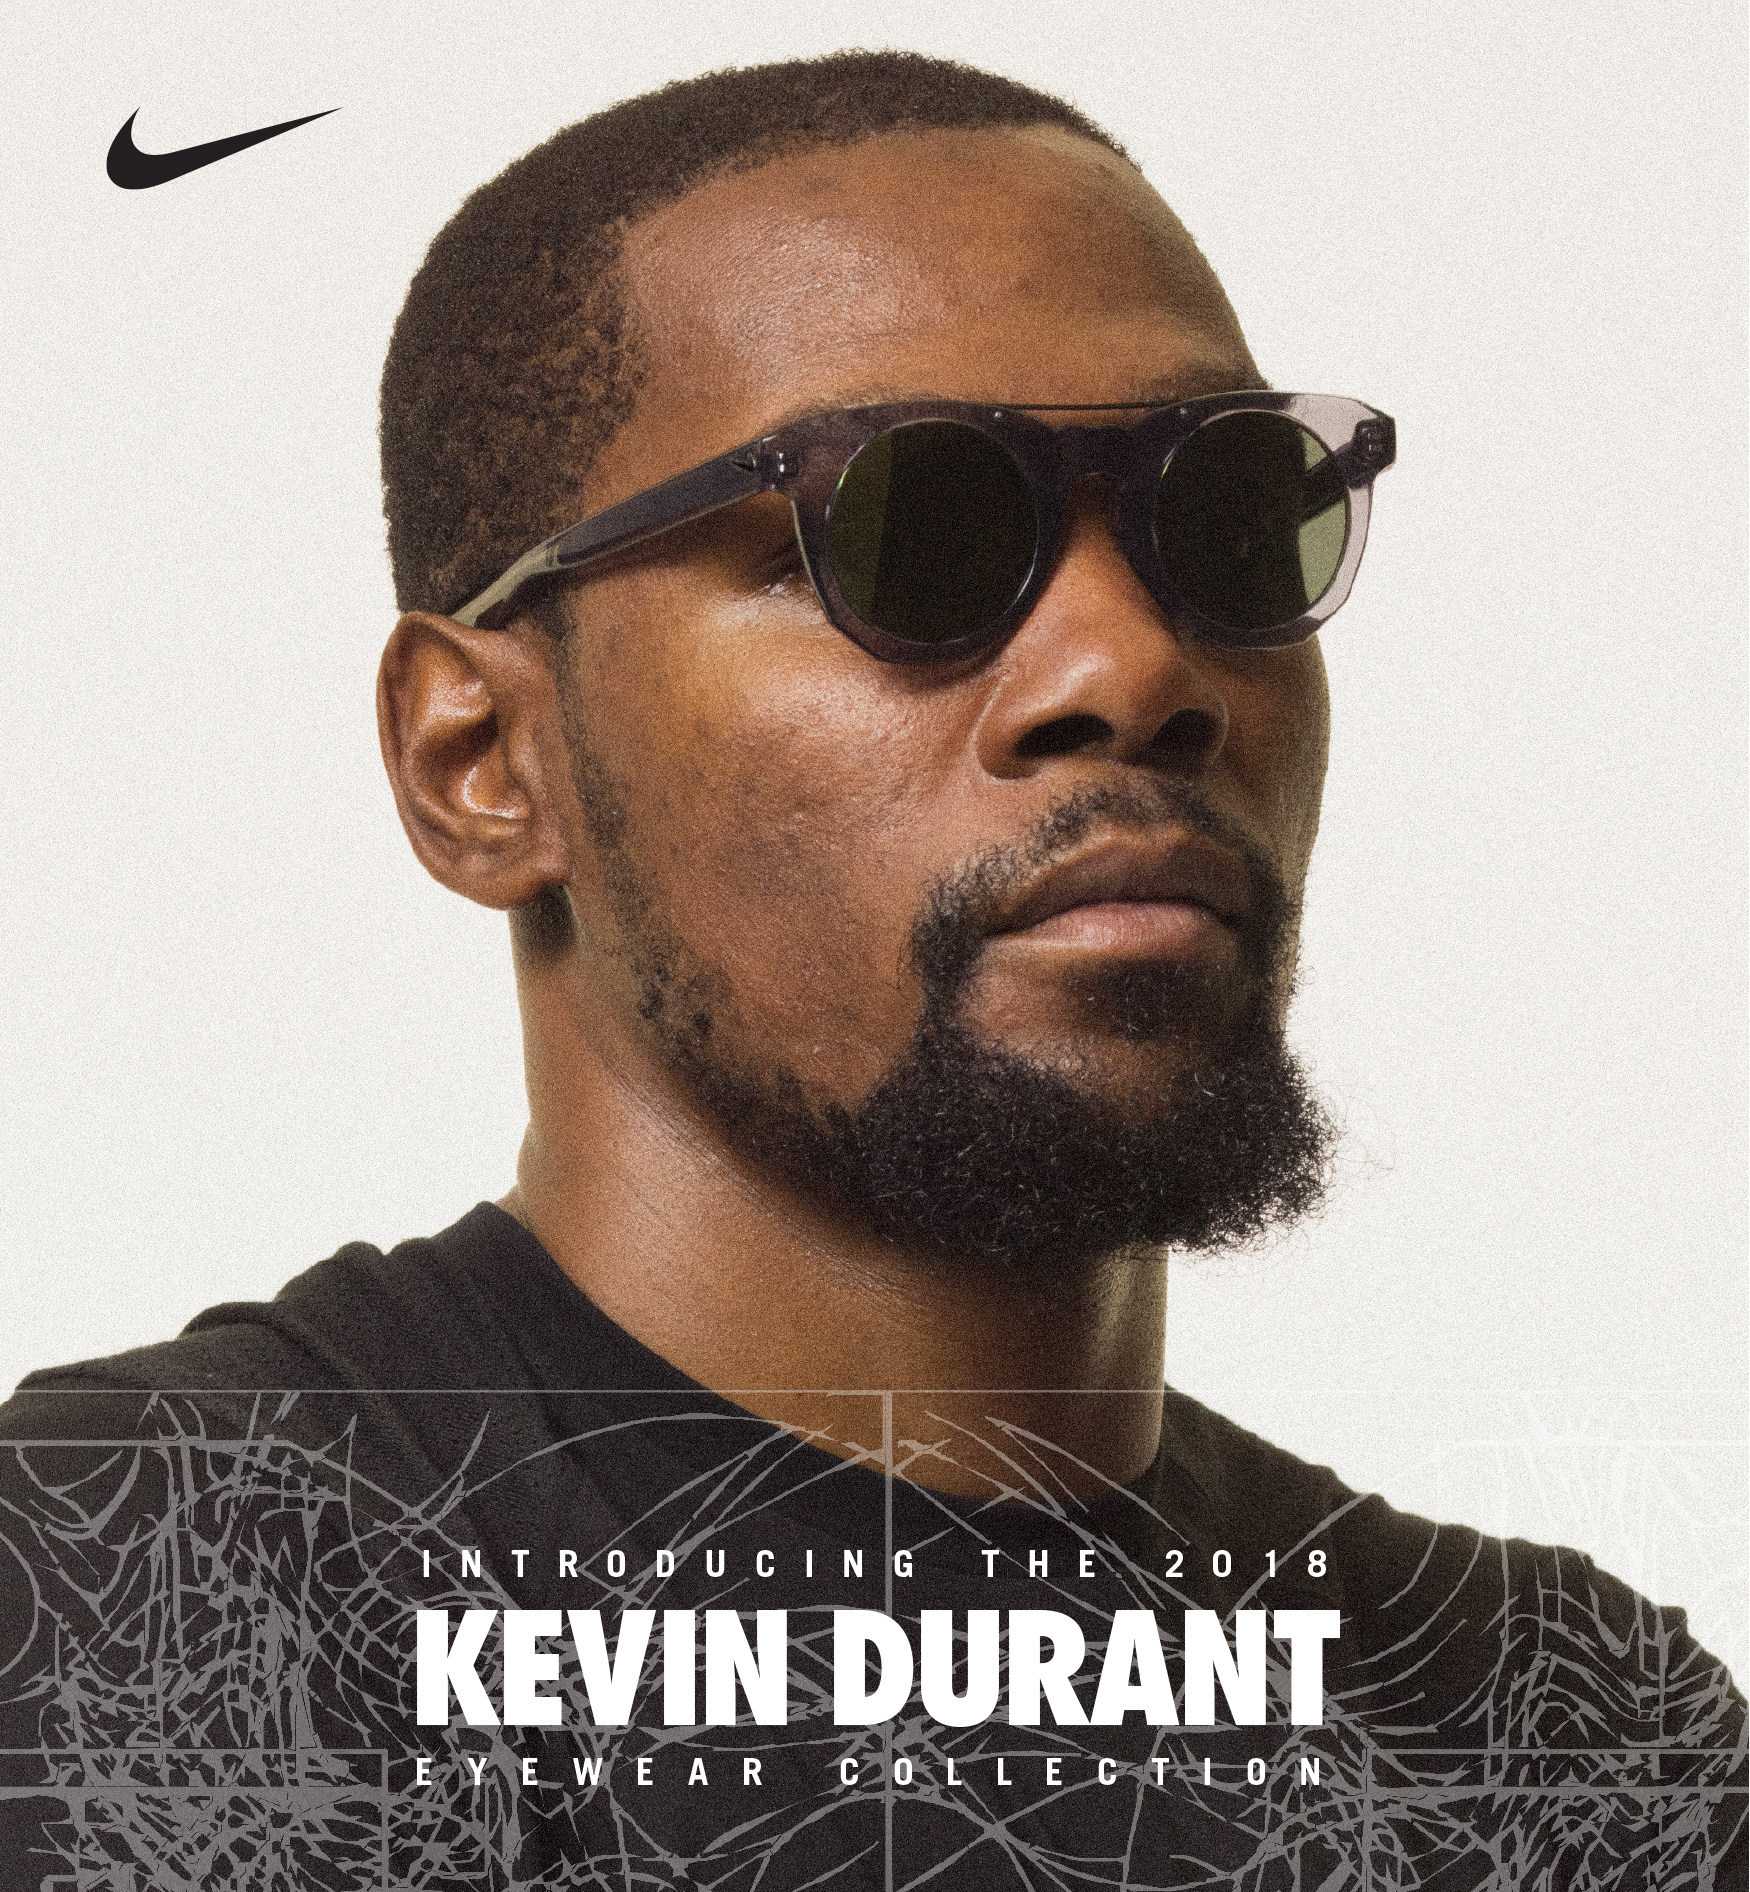 kevin durant fashion style